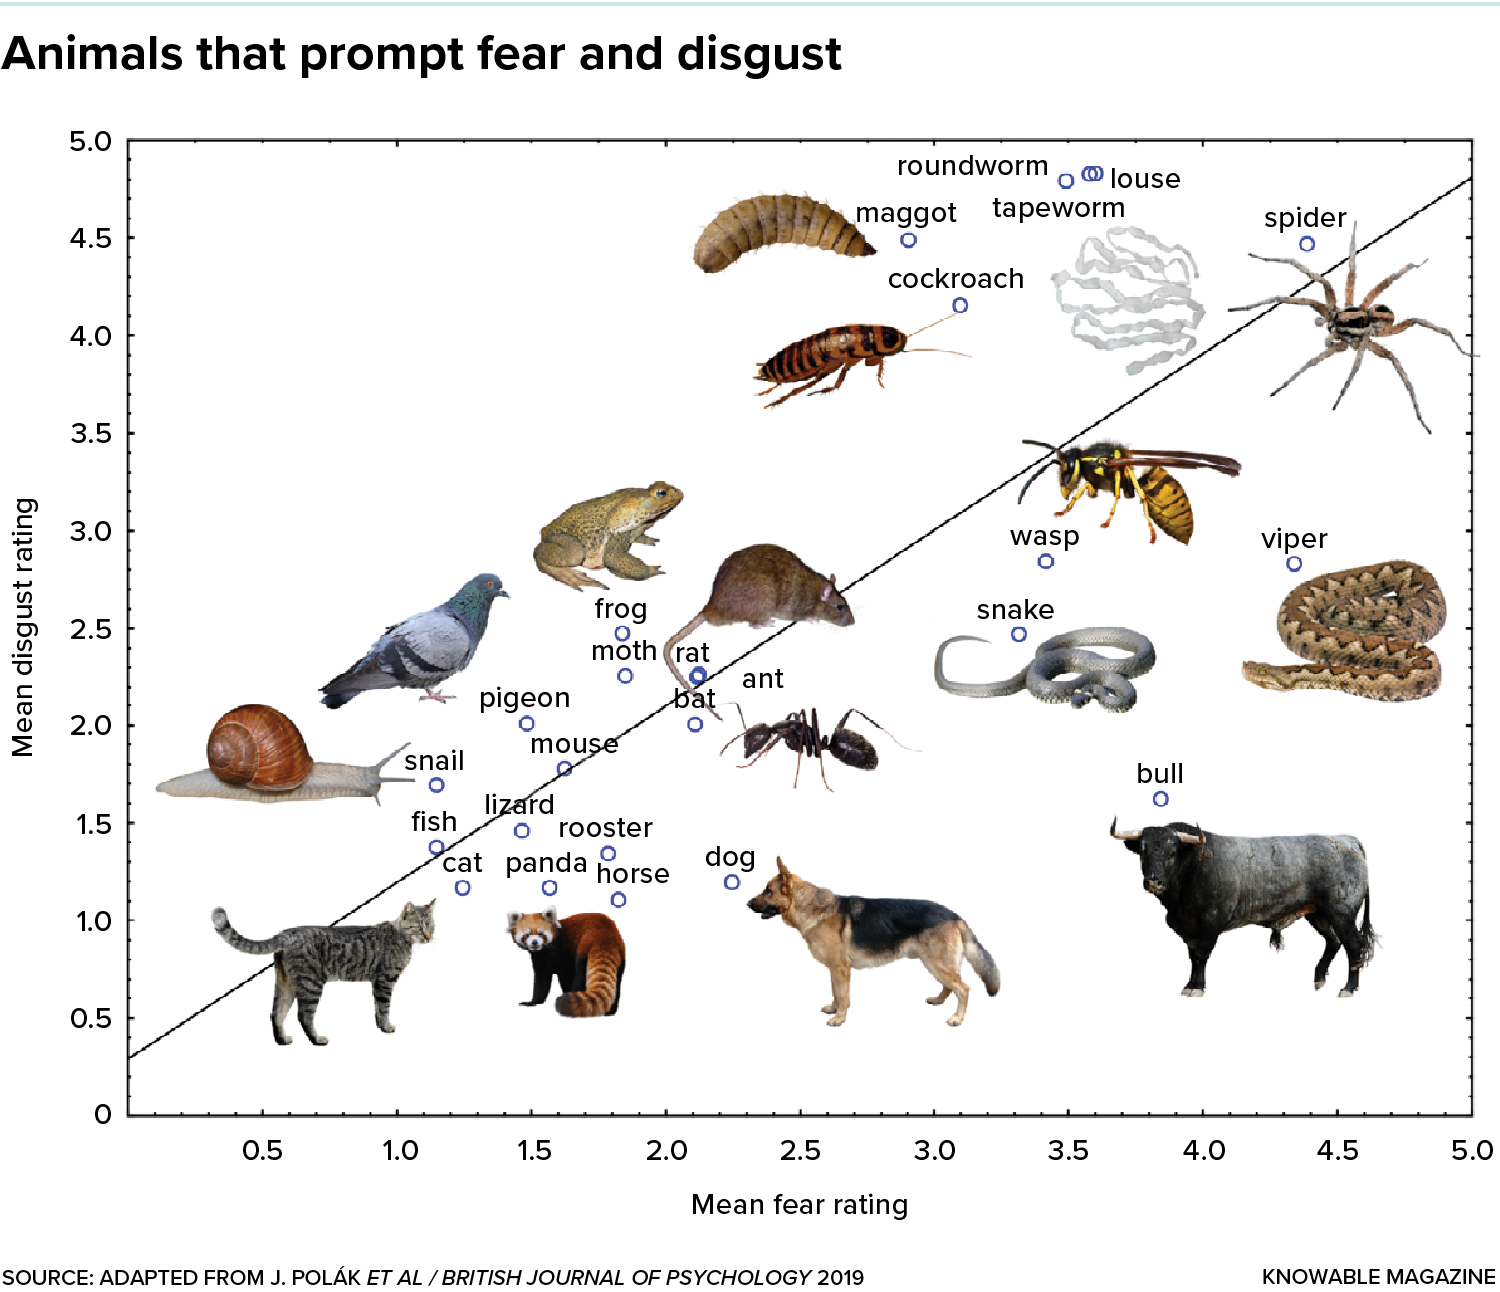 A graph with fear on the X axis and disgust on the Y axis that plots people’s ratings for several animals including cat, pigeon, snail, snake, cockroach, wasp and spider.